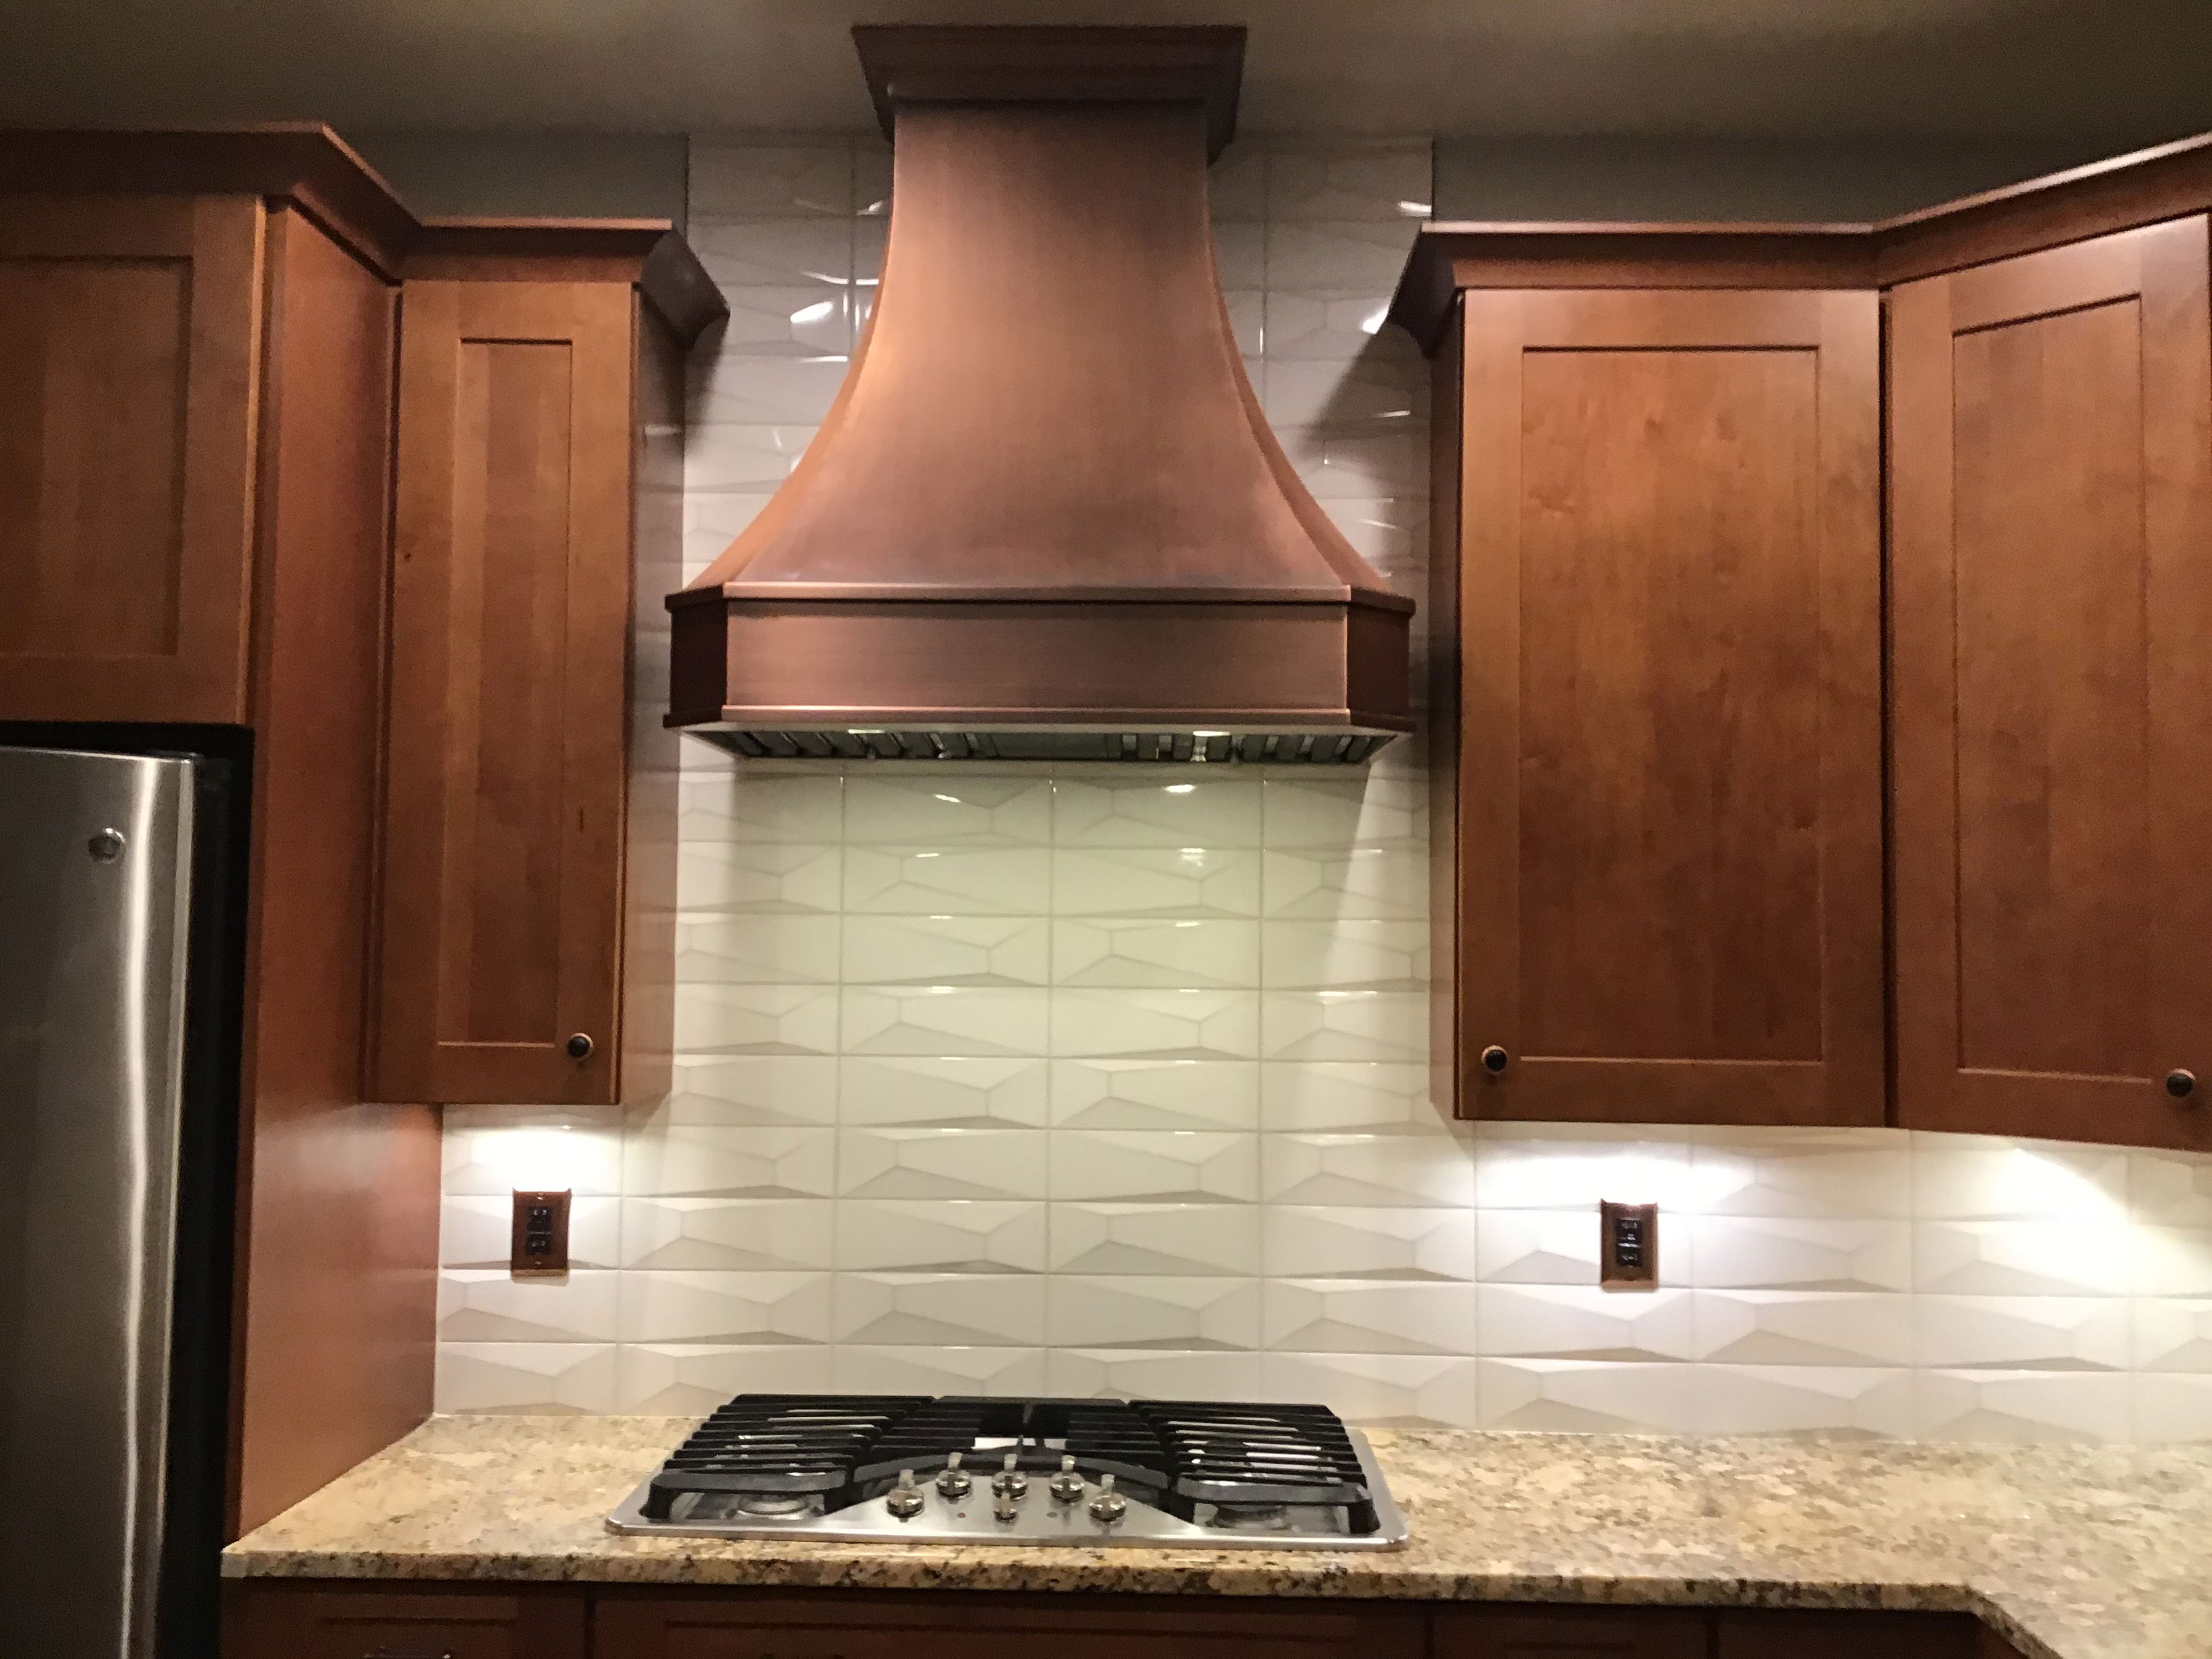 Discover cottage kitchen design idea with range hood, featuring rich brown cabinets, luxurious marble countertops, brick backsplas